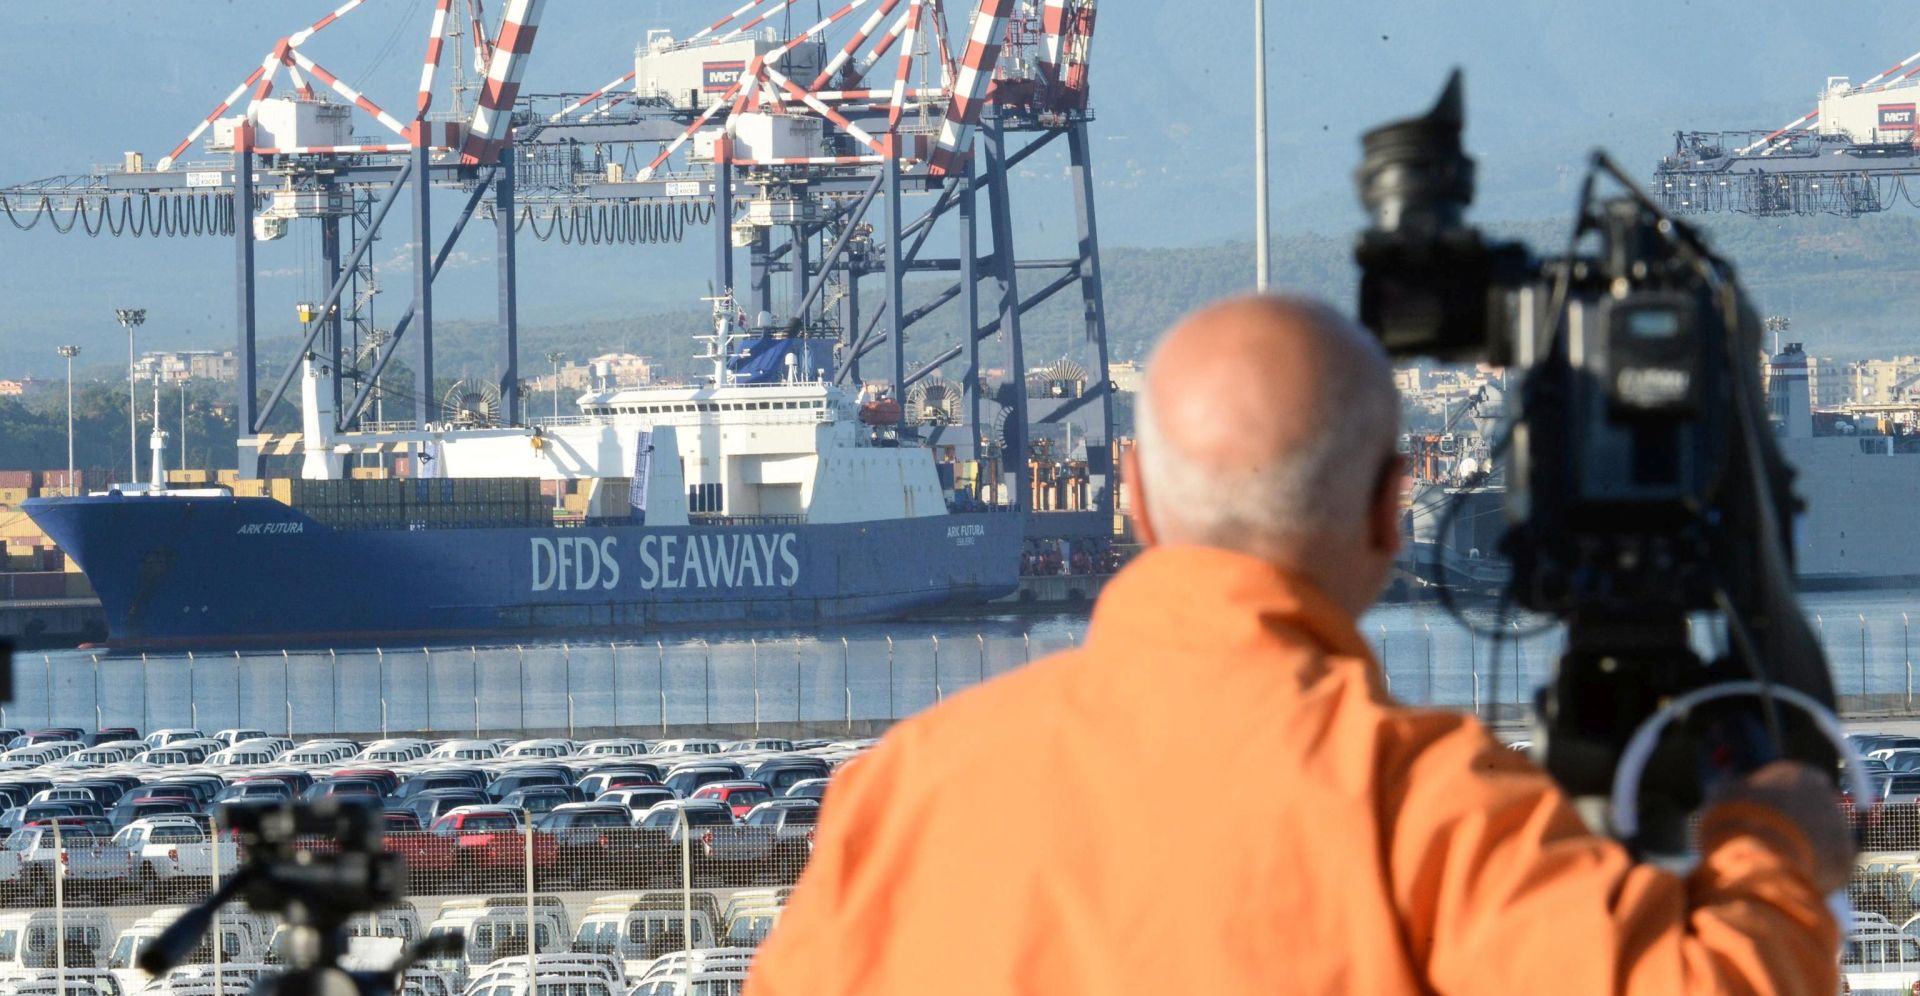 epa04295214 A cameraman watches the Danish ship Ark Futura docking in the harbor of Gioia Tauro, Italy, 02 July 2014. The vessel is carrying the final batch of Syria's chemical weapons, the Organisation for the Prohibition of Chemical Weapons (OPCW) said. The weapons will be delivered for destruction on board a US vessel and at commercial facilities in Finland, Germany, Britain and the United States. The US chemical laboratory ship 'MV Cape Ray', which is equipped to neutralize and destroy the hazardous materials in special chemical reactors, already docked in Gioia Tauro harbor on 01 July 2014.  EPA/CIRO FUSCO